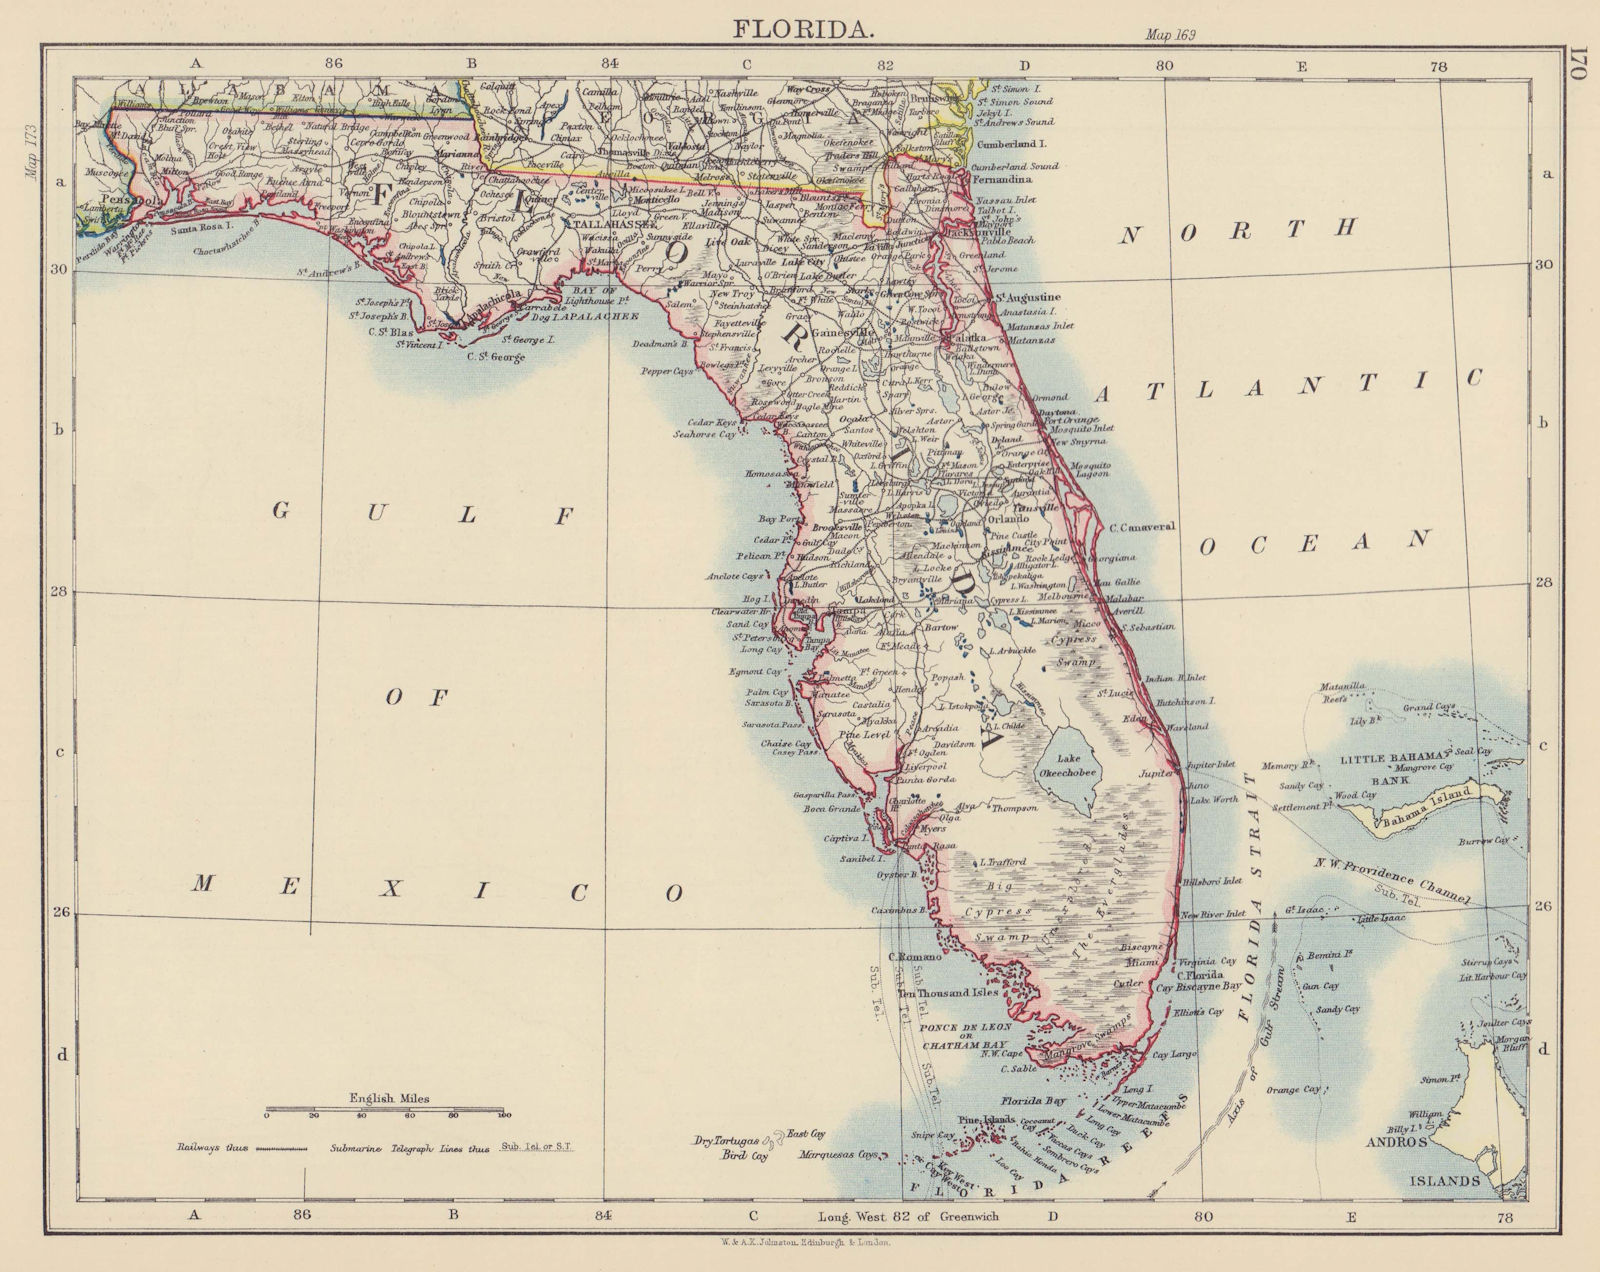 Associate Product FLORIDA. State map. Shows Miami. Railroads. JOHNSTON 1901 old antique